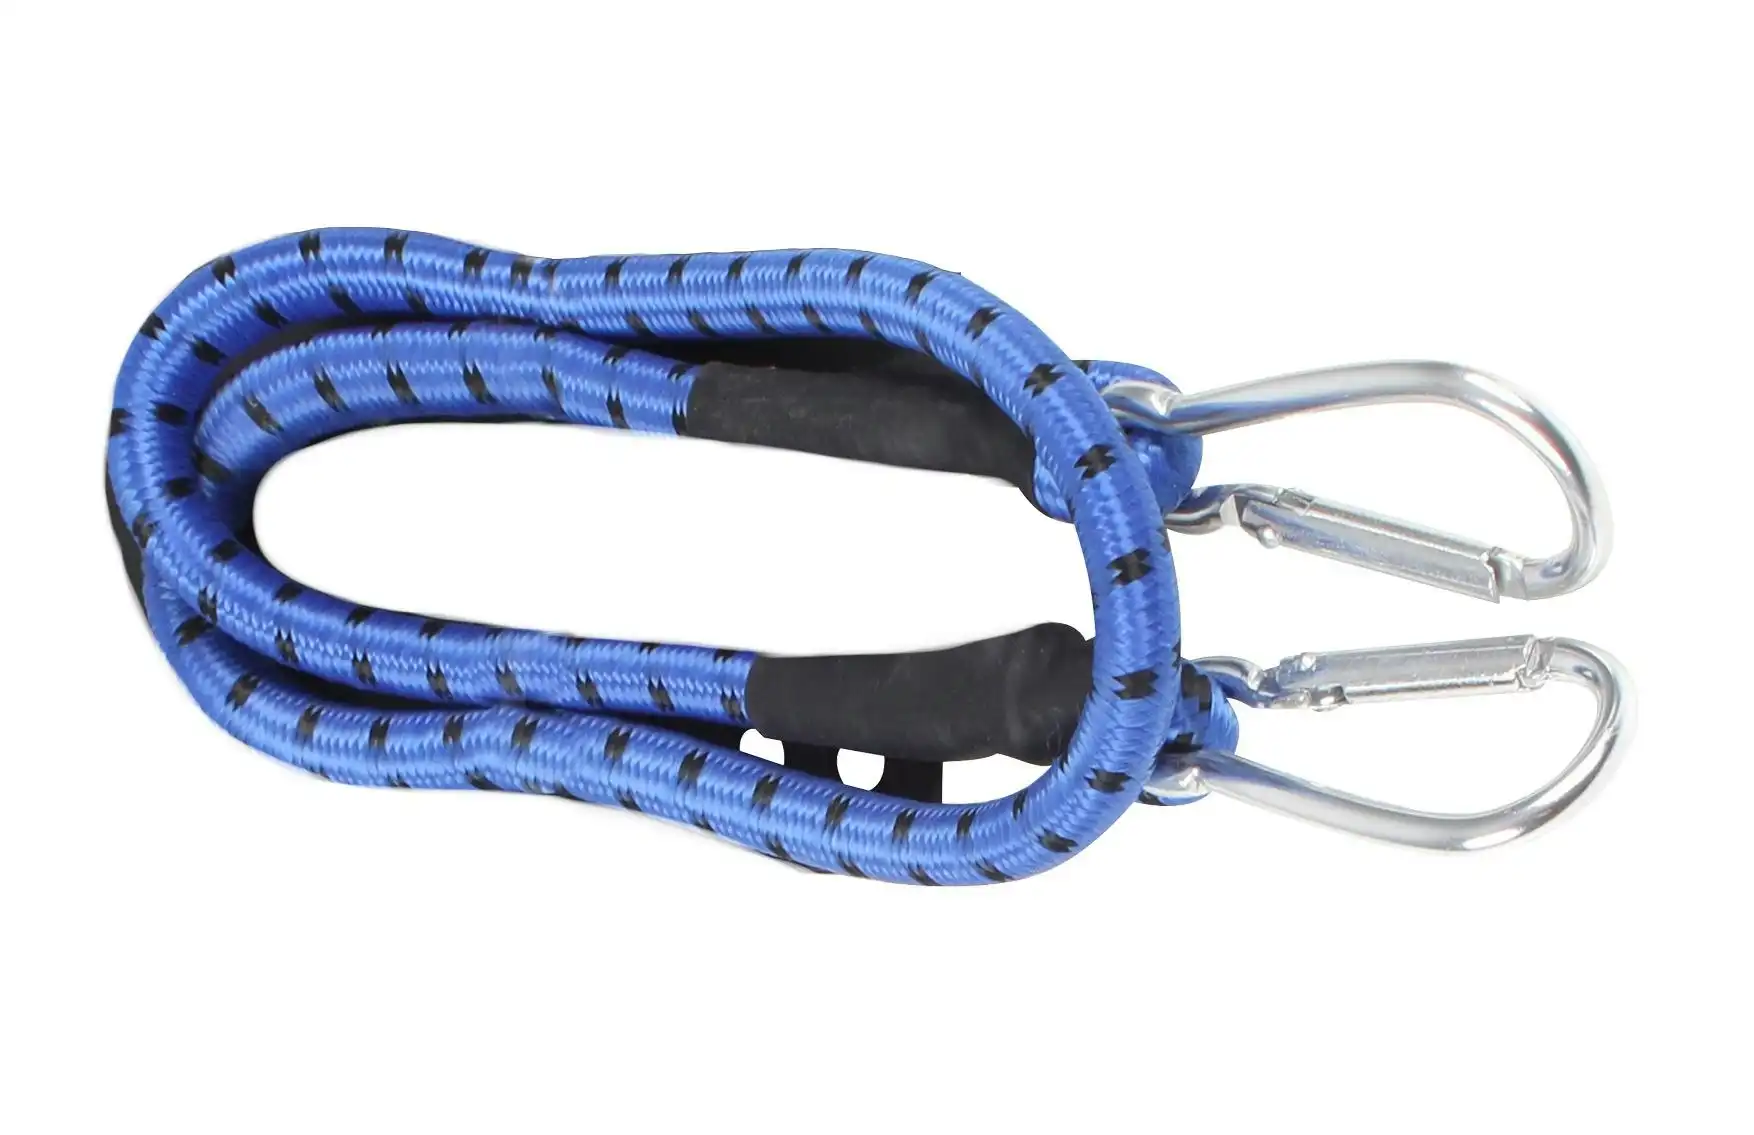 60cm BUNGEE CORD WITH CARABINERS